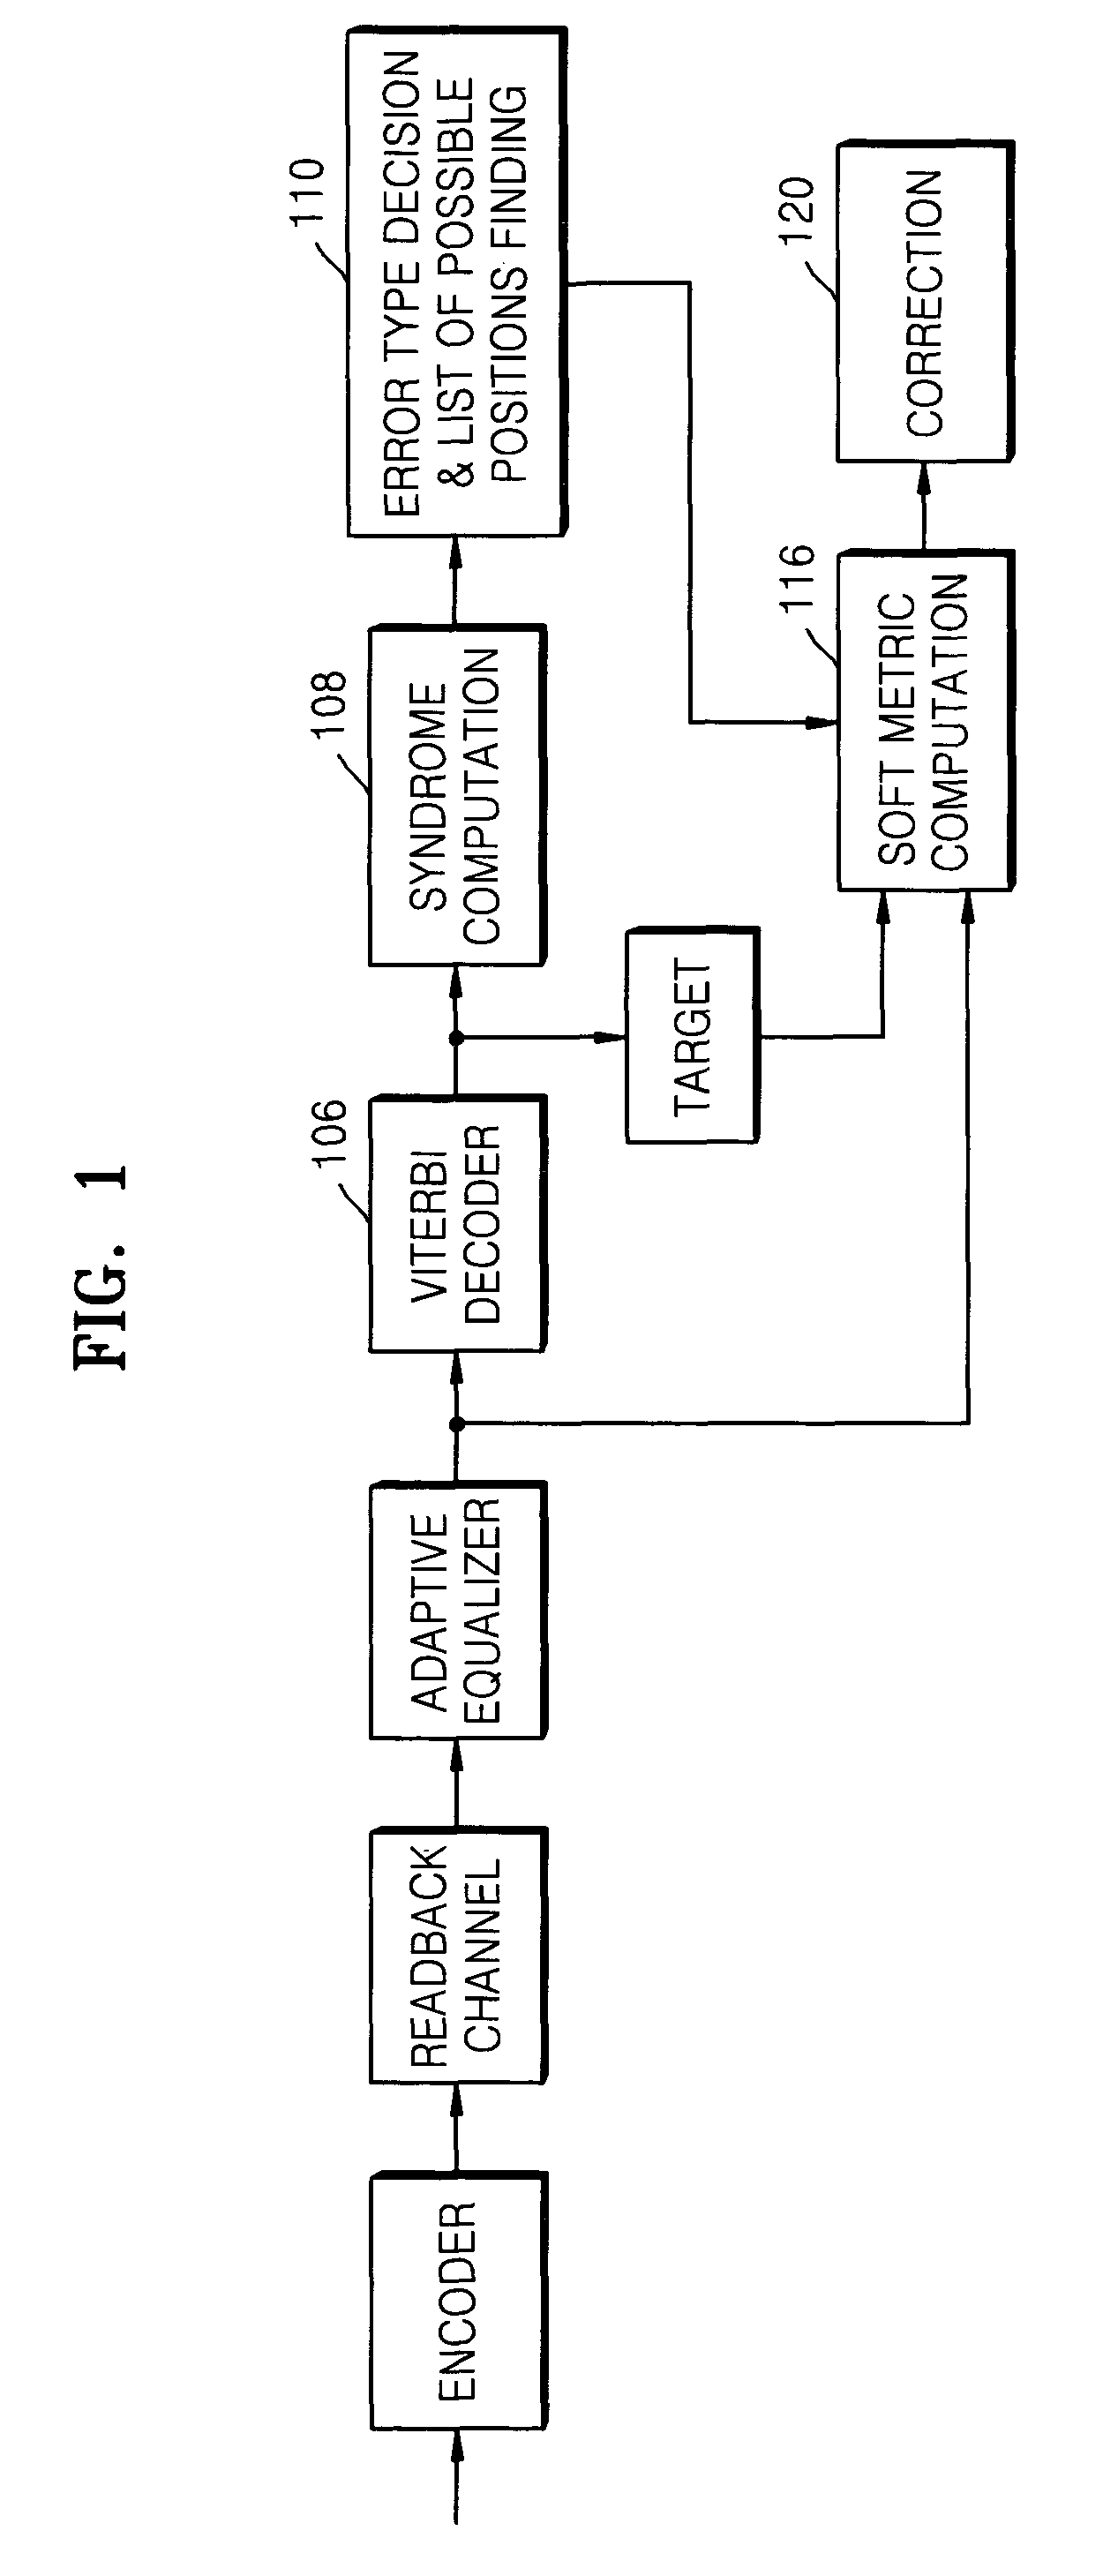 Error correction method and apparatus for predetermined error patterns